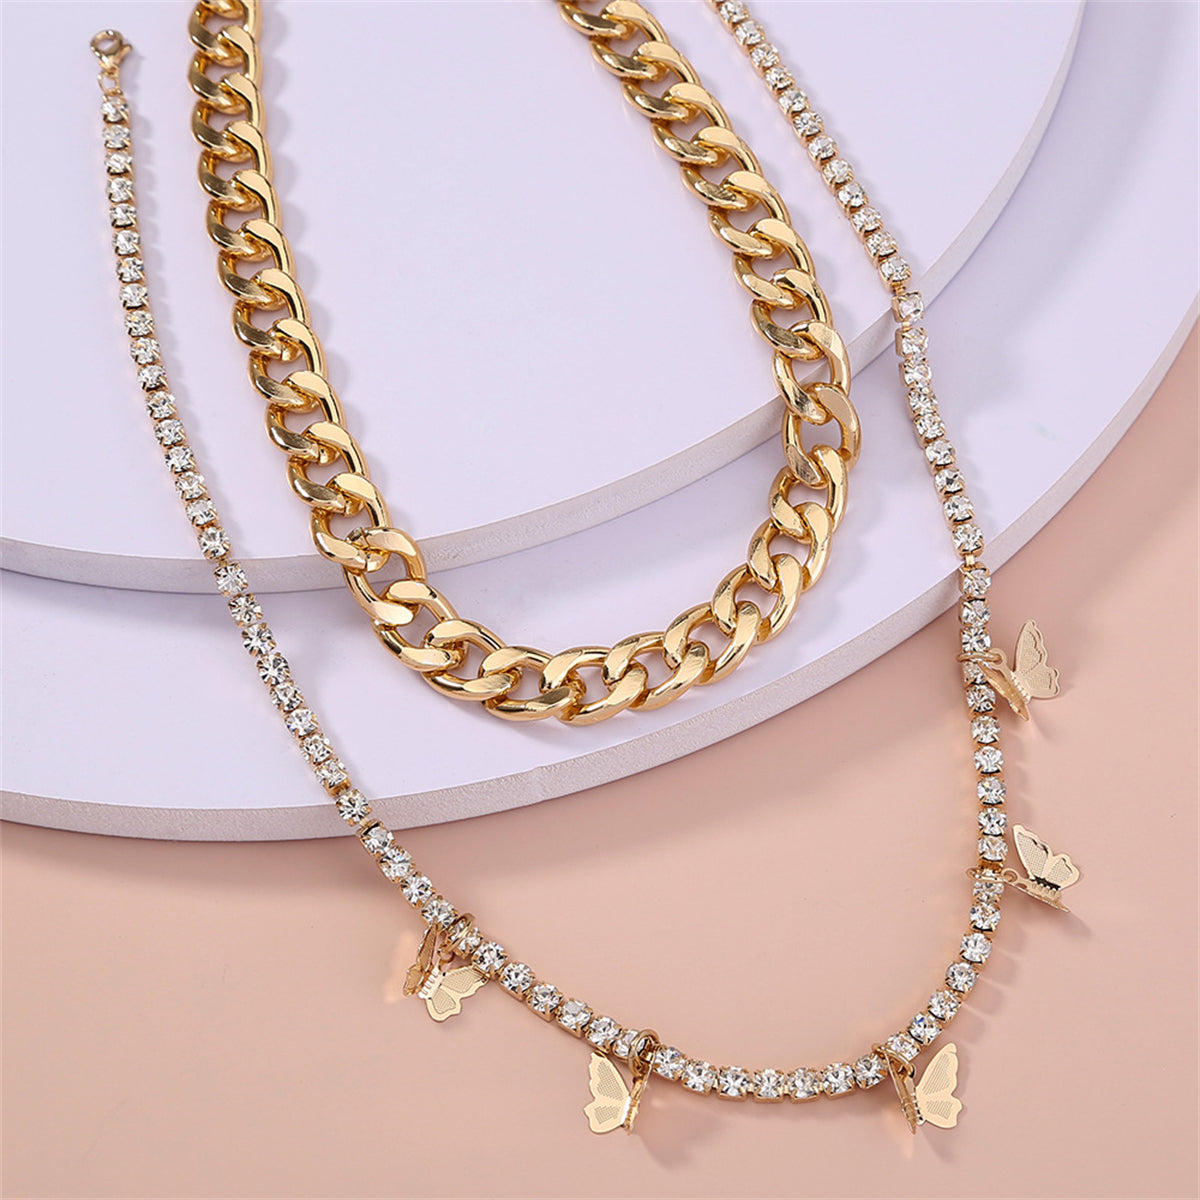 Cubic Zirconia & 18K Gold-Plated Butterfly Station Necklace Set